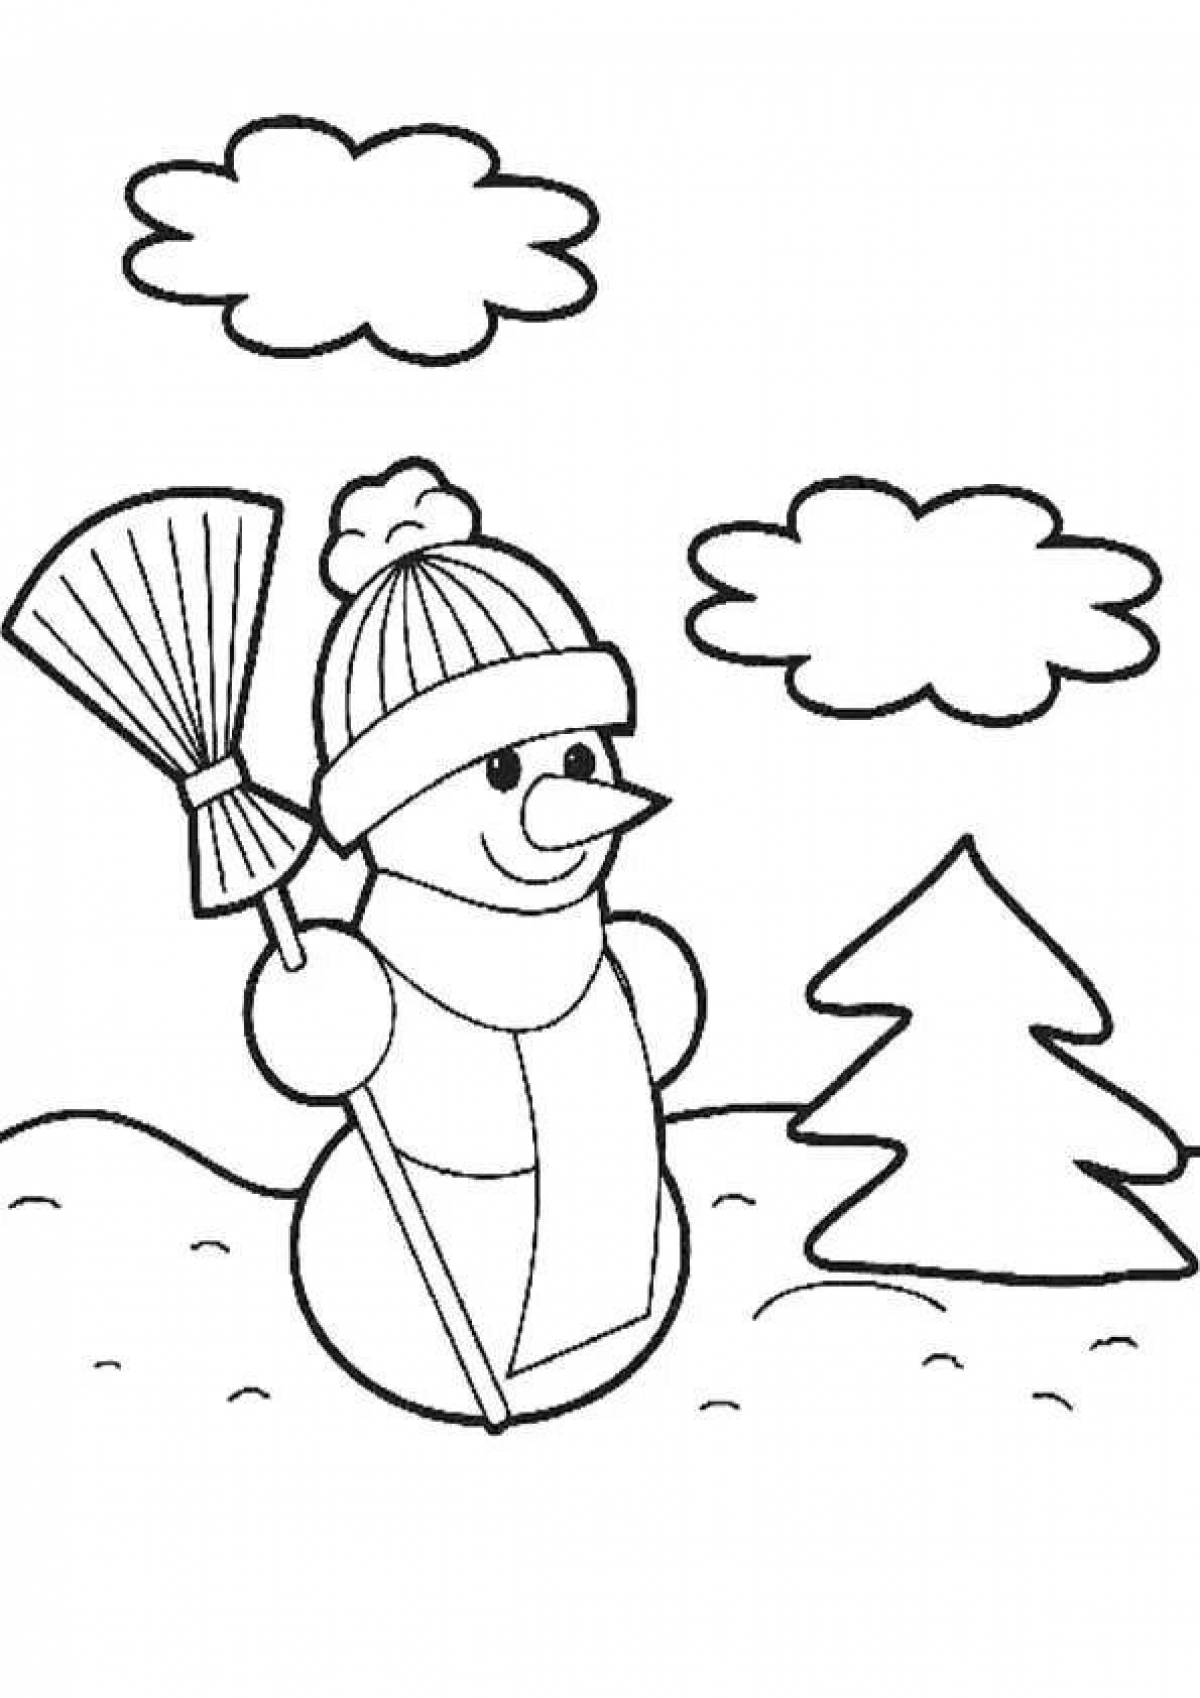 Joyful winter coloring book for children 2-3 years old